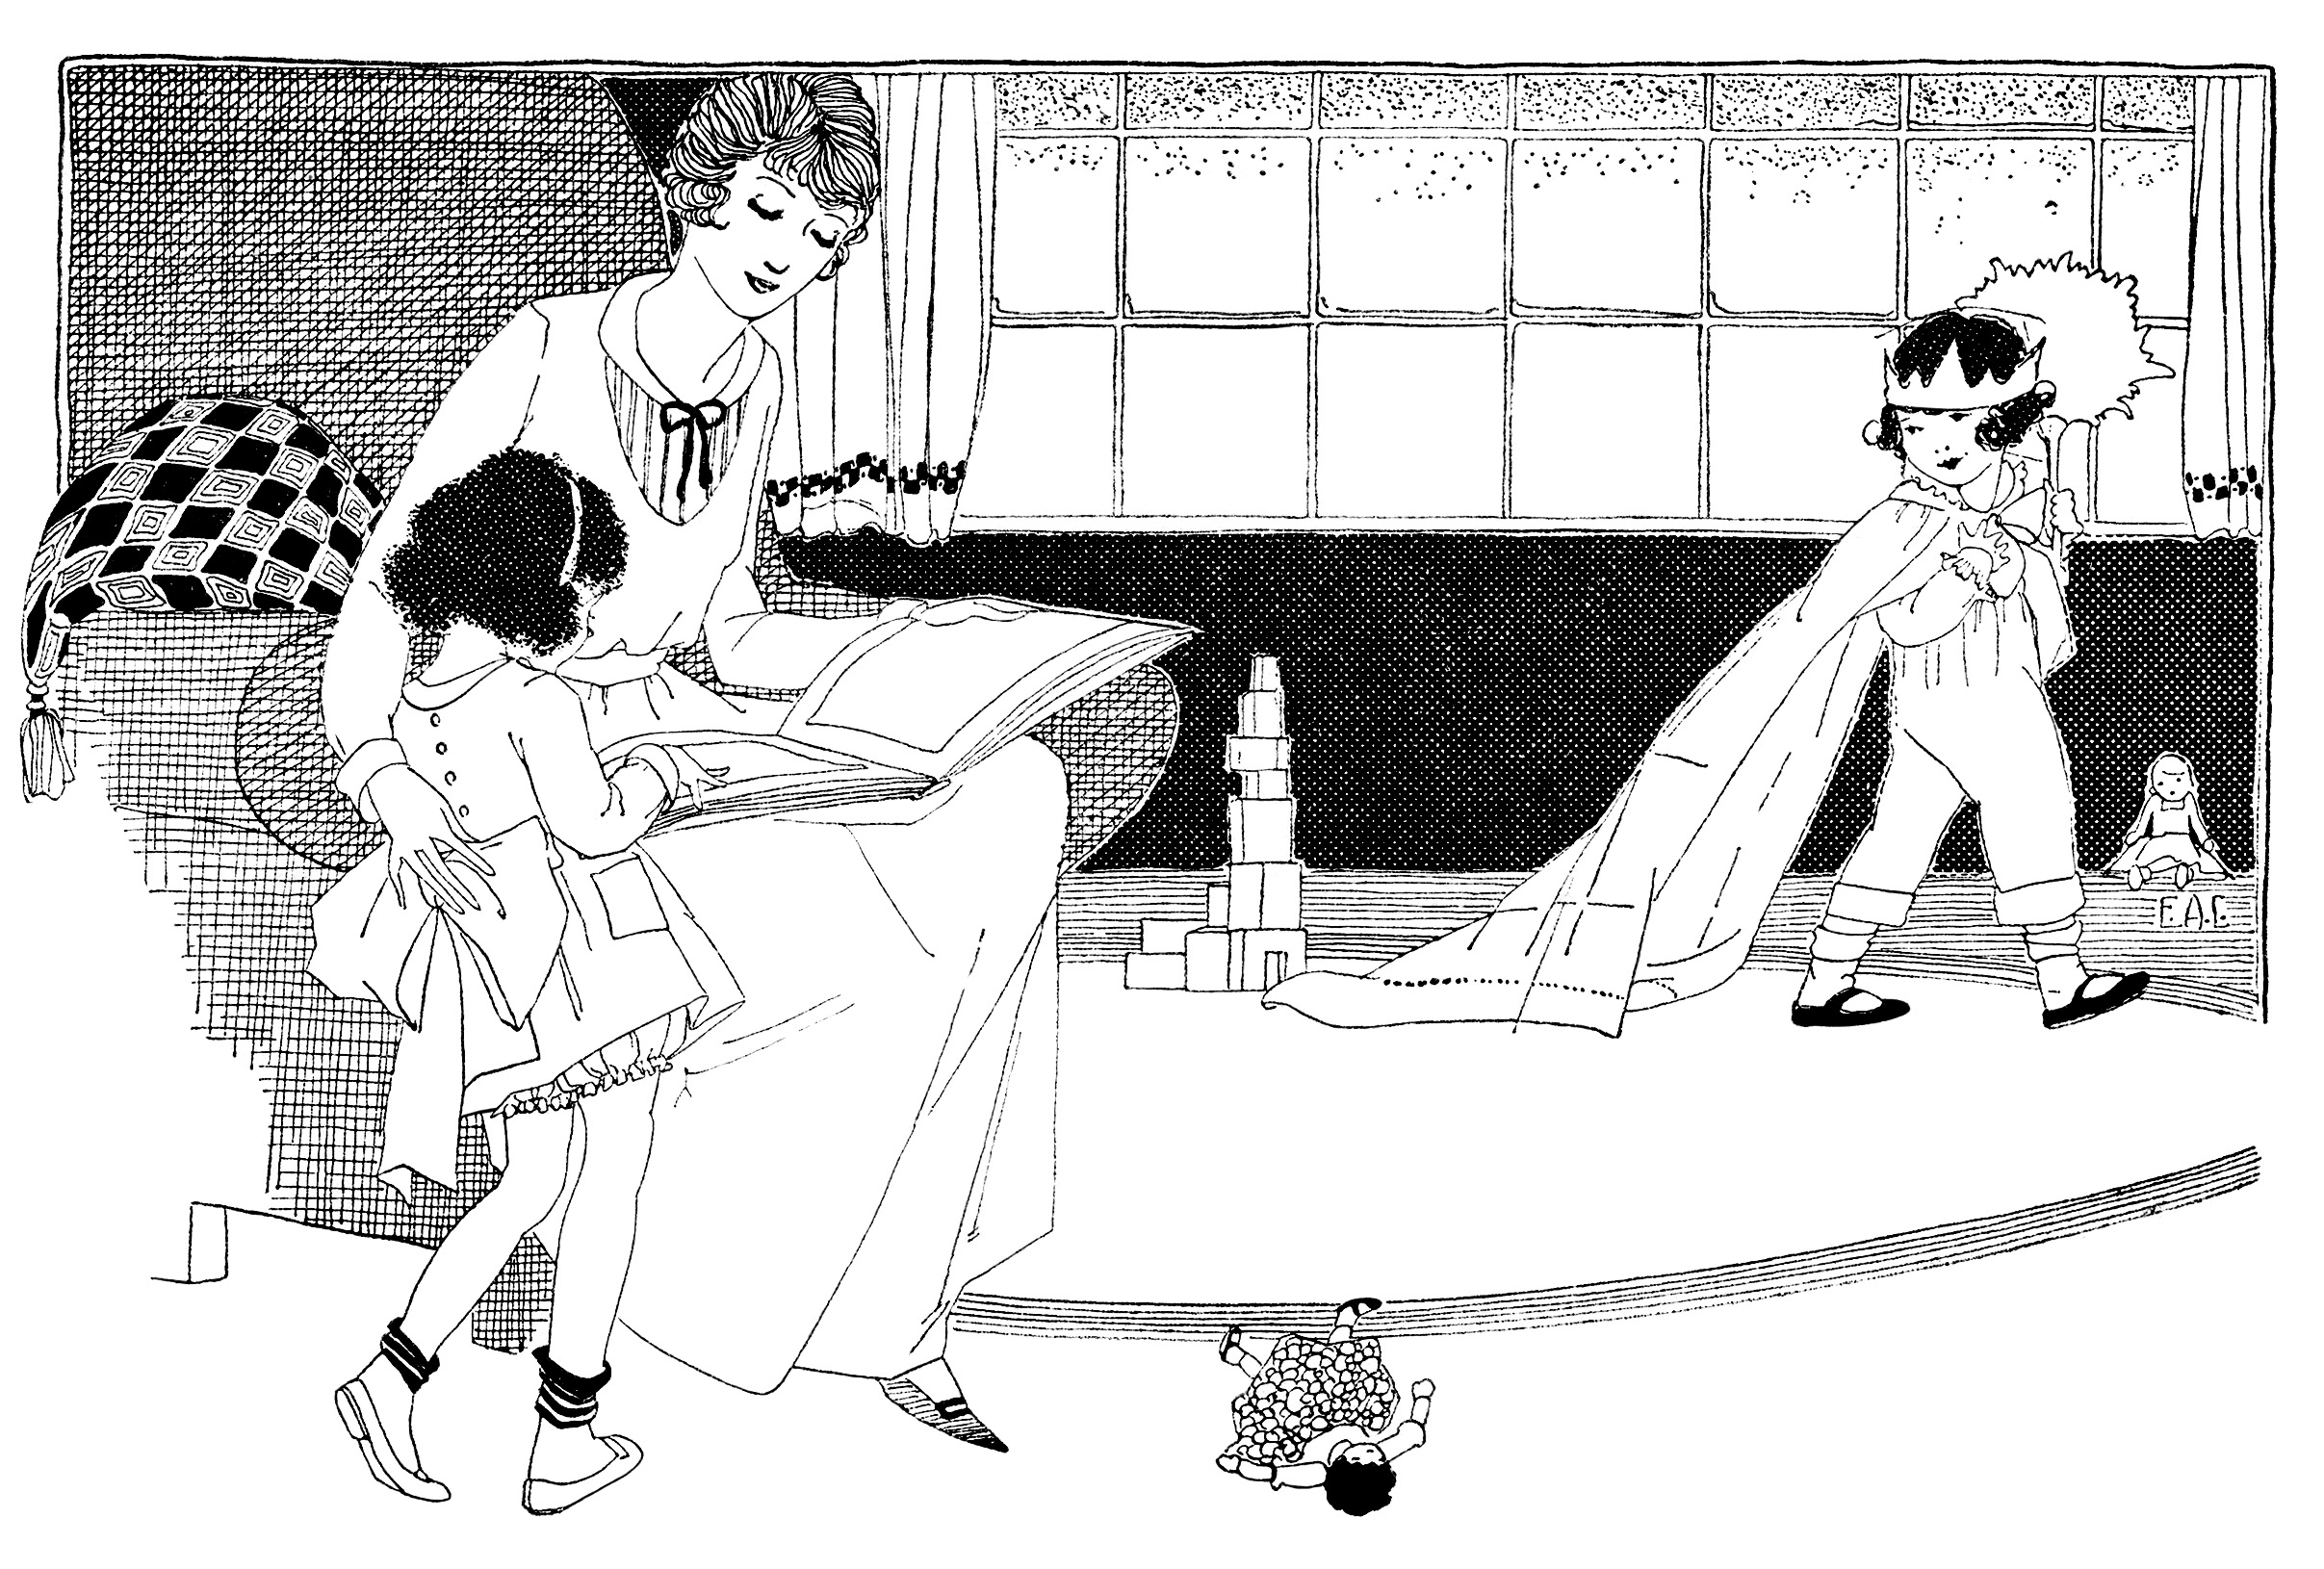 black and white graphics, mother and children clip art, mom and kids at play, woman reading to child, kids toys playtime illustration